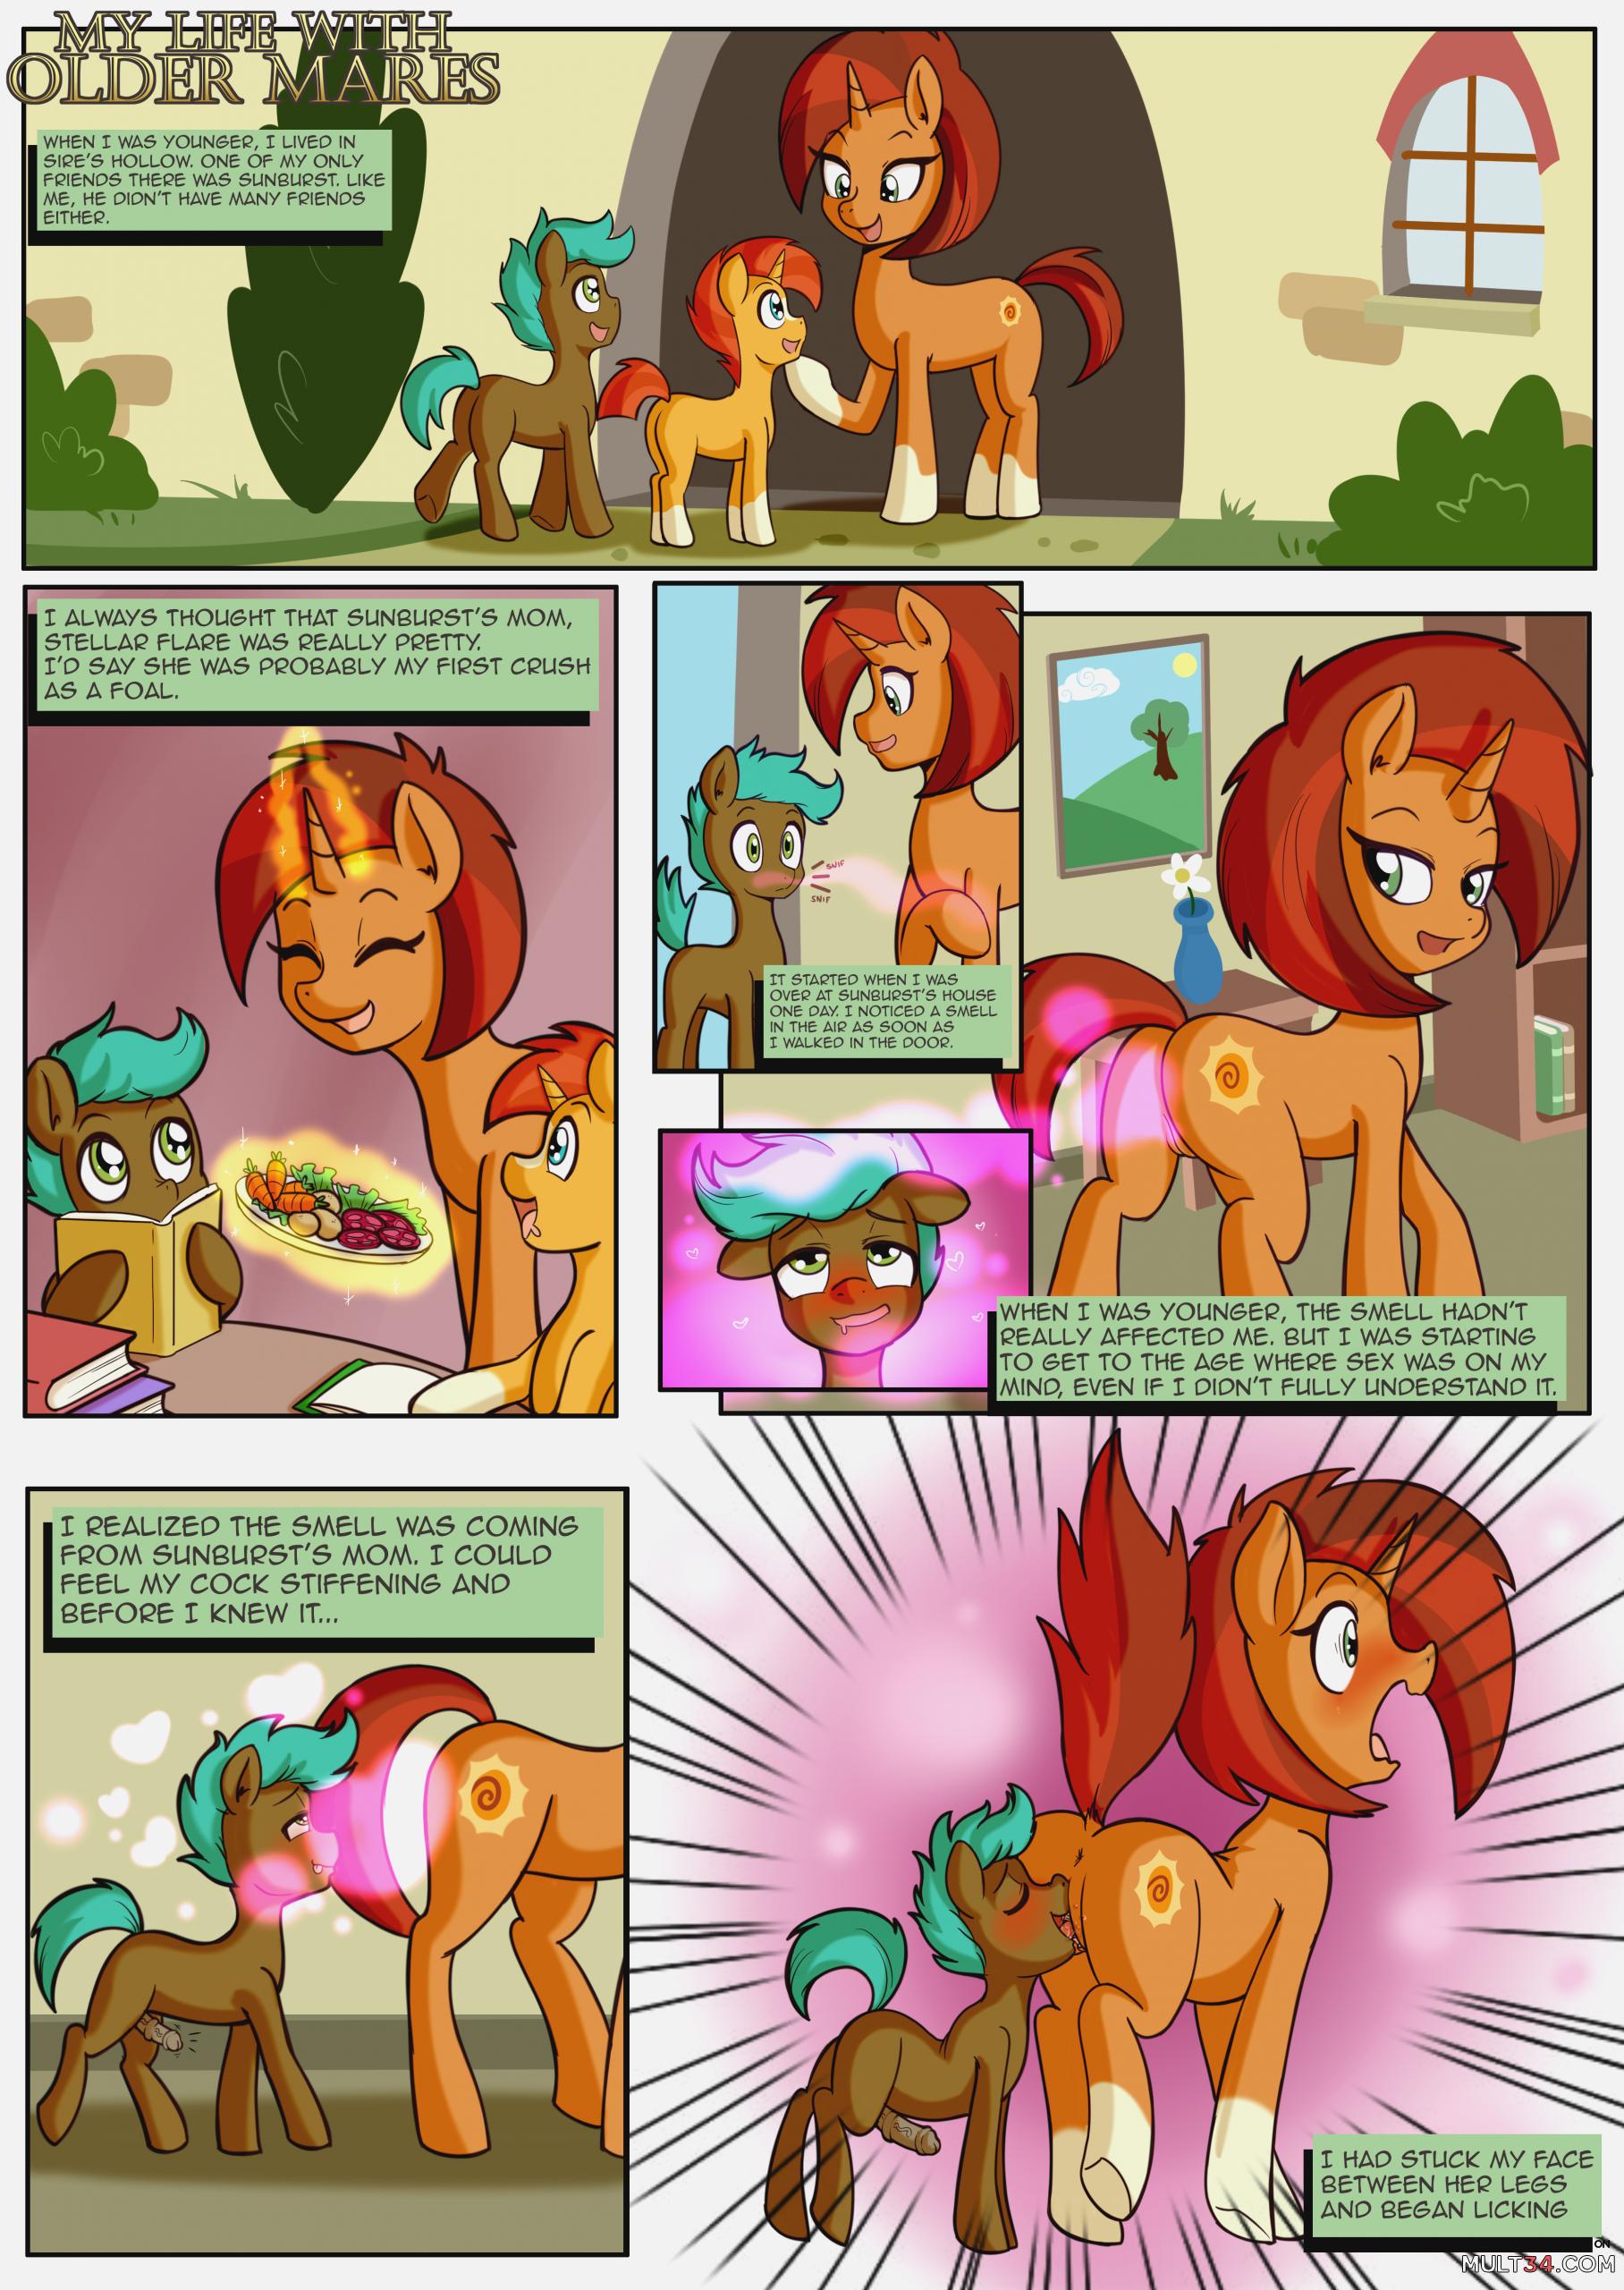 1816px x 2560px - My Life With Older Mares porn comic - the best cartoon porn comics, Rule 34  | MULT34